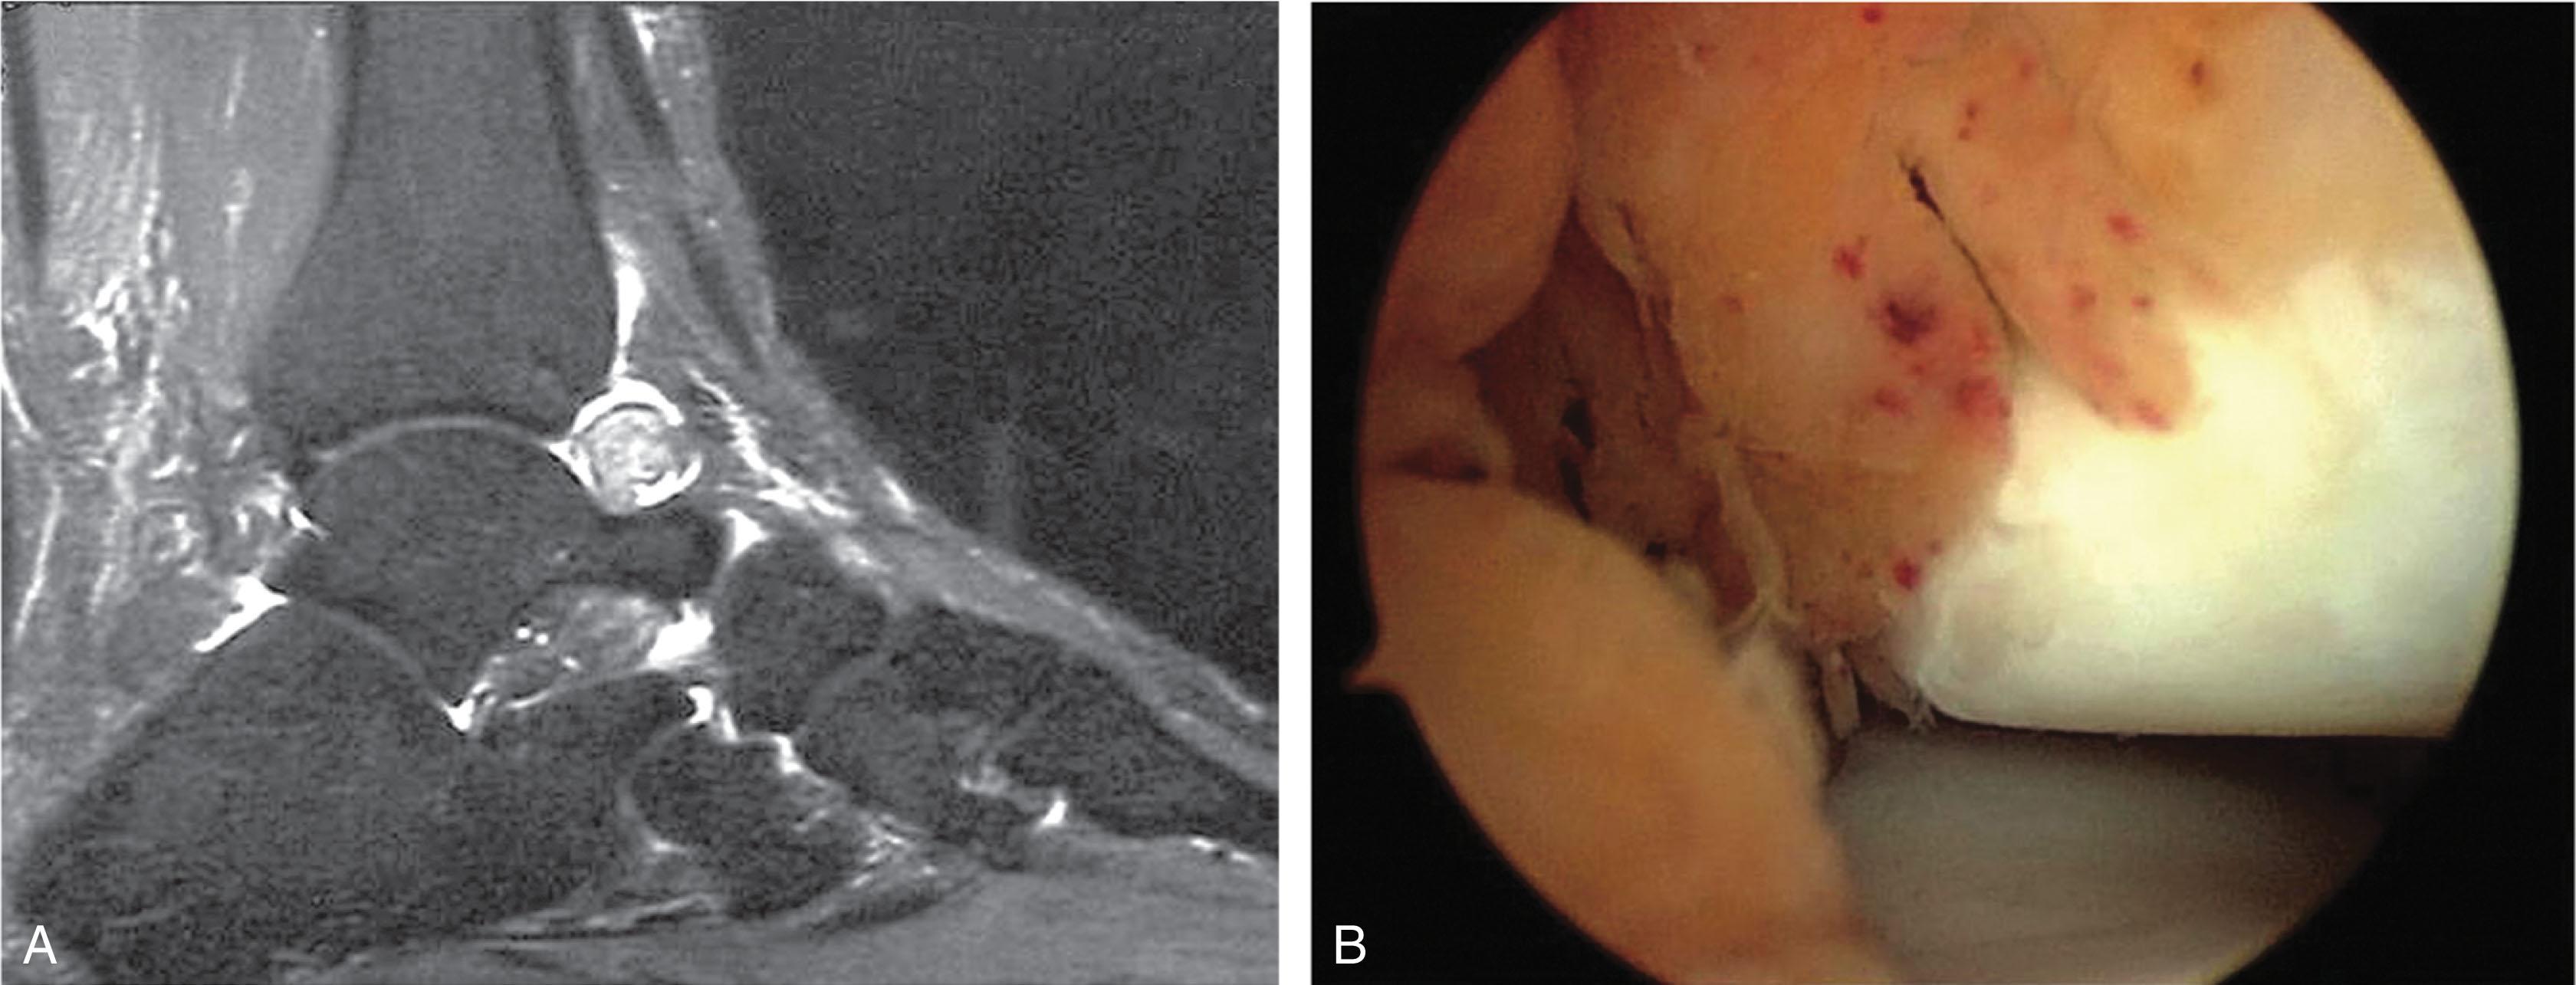 Fig. 39-17, Tenosynovial giant cell tumor (pigmented villonodular synovitis). A , Sagittal T2 magnetic resonance image showing large synovial nodules anterior to ankle with an effusion. B , Arthroscopic picture showing hemosiderin staining of inflamed synovium with papillary formation.